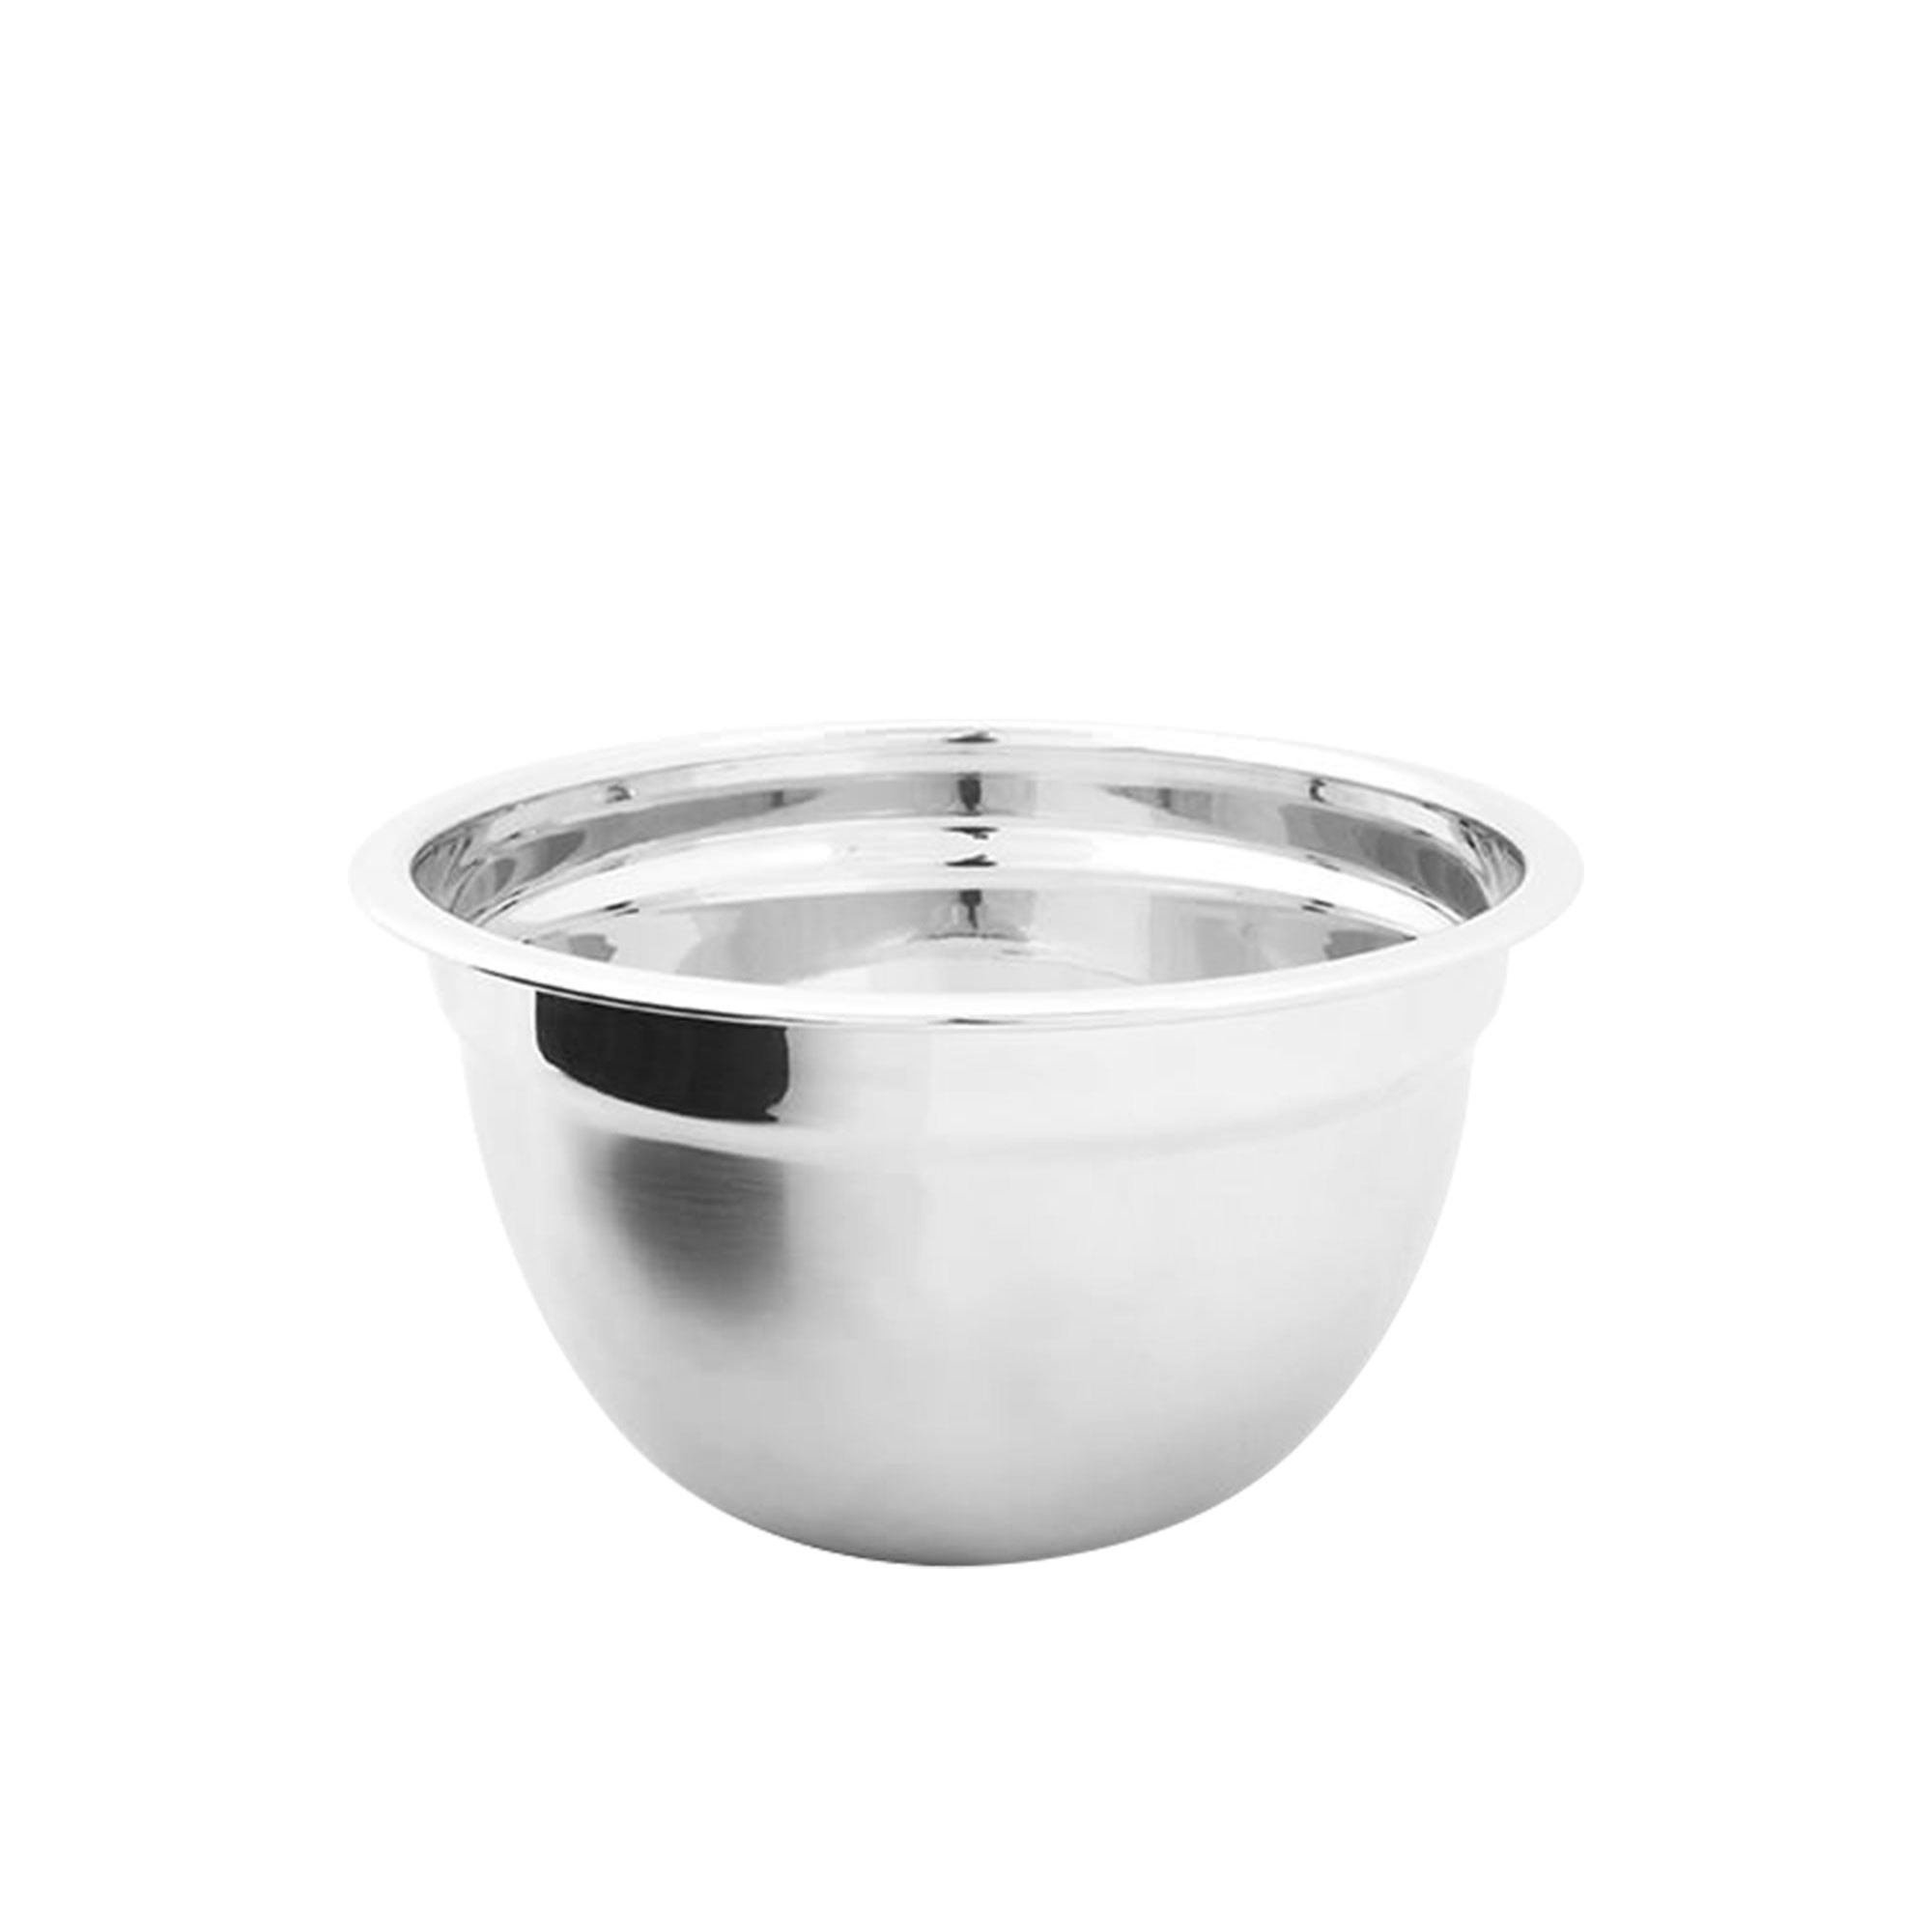 Cuisena Stainless Steel Mixing Bowl 18cm - 1.4L Image 1